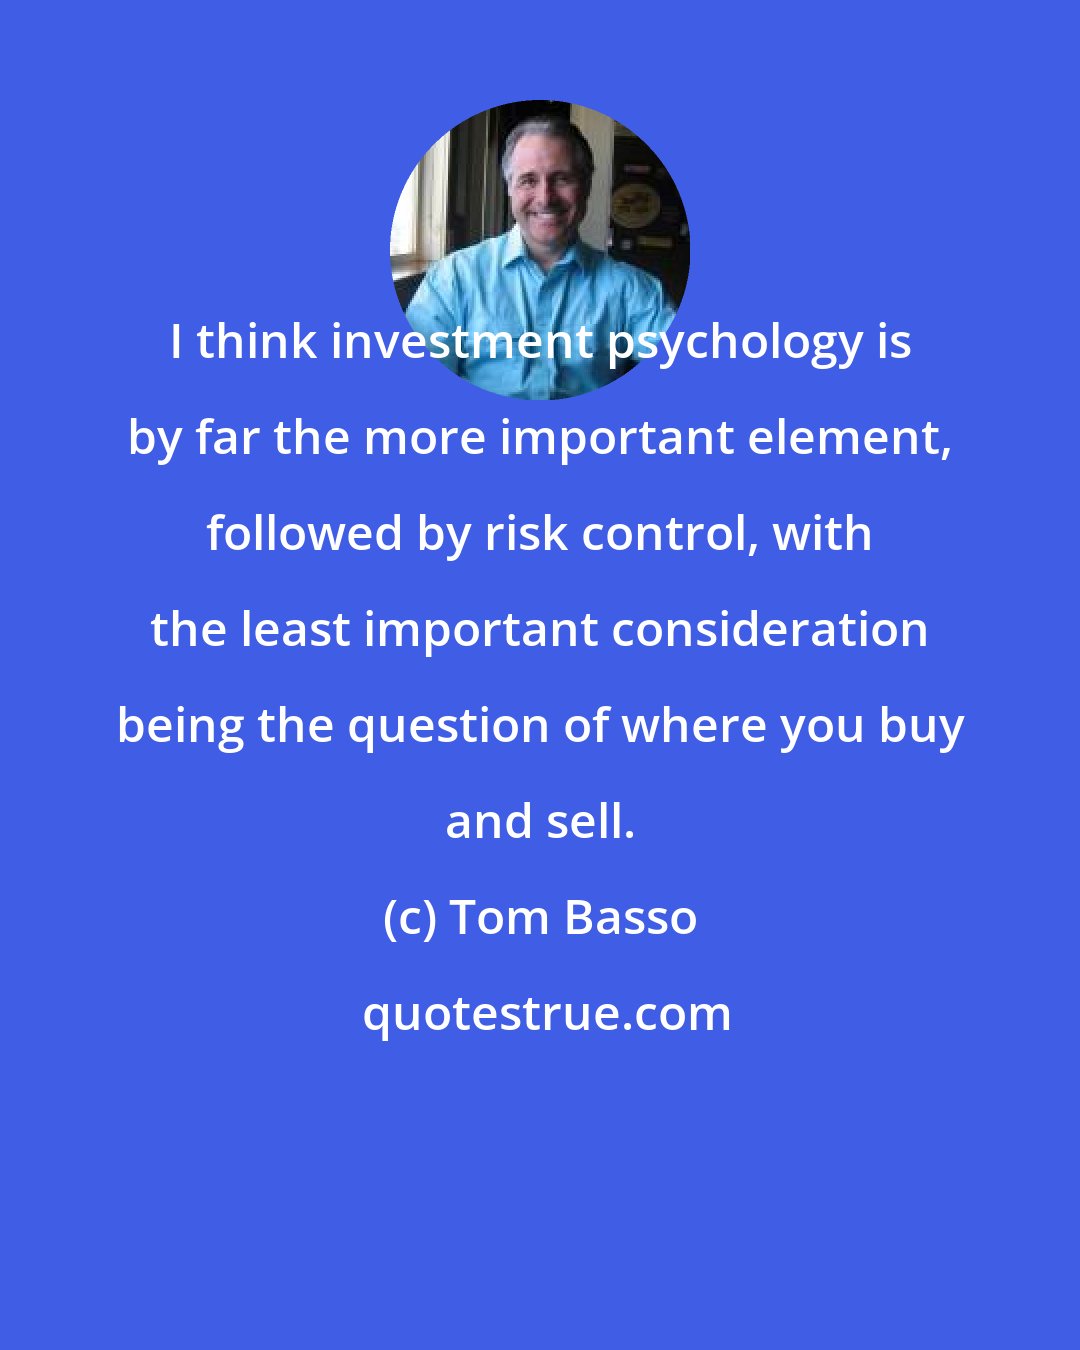 Tom Basso: I think investment psychology is by far the more important element, followed by risk control, with the least important consideration being the question of where you buy and sell.